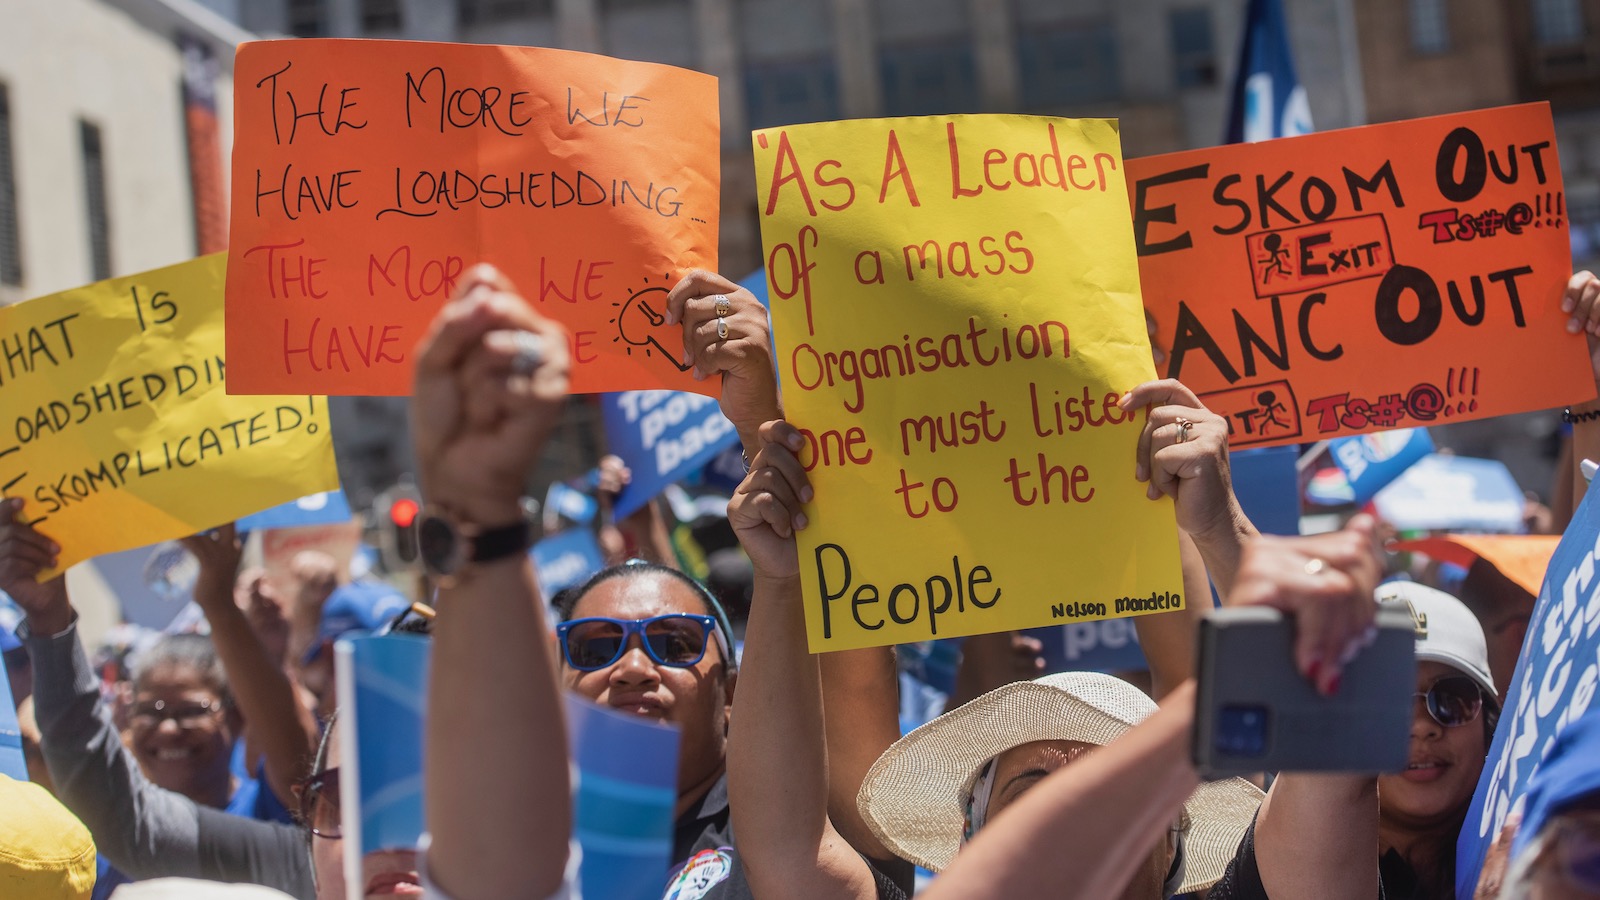 Protestors waving colorful signs rally in Cape Town to protest ongoing electricity outages prompted by the nation's aging coal-fired power plants.